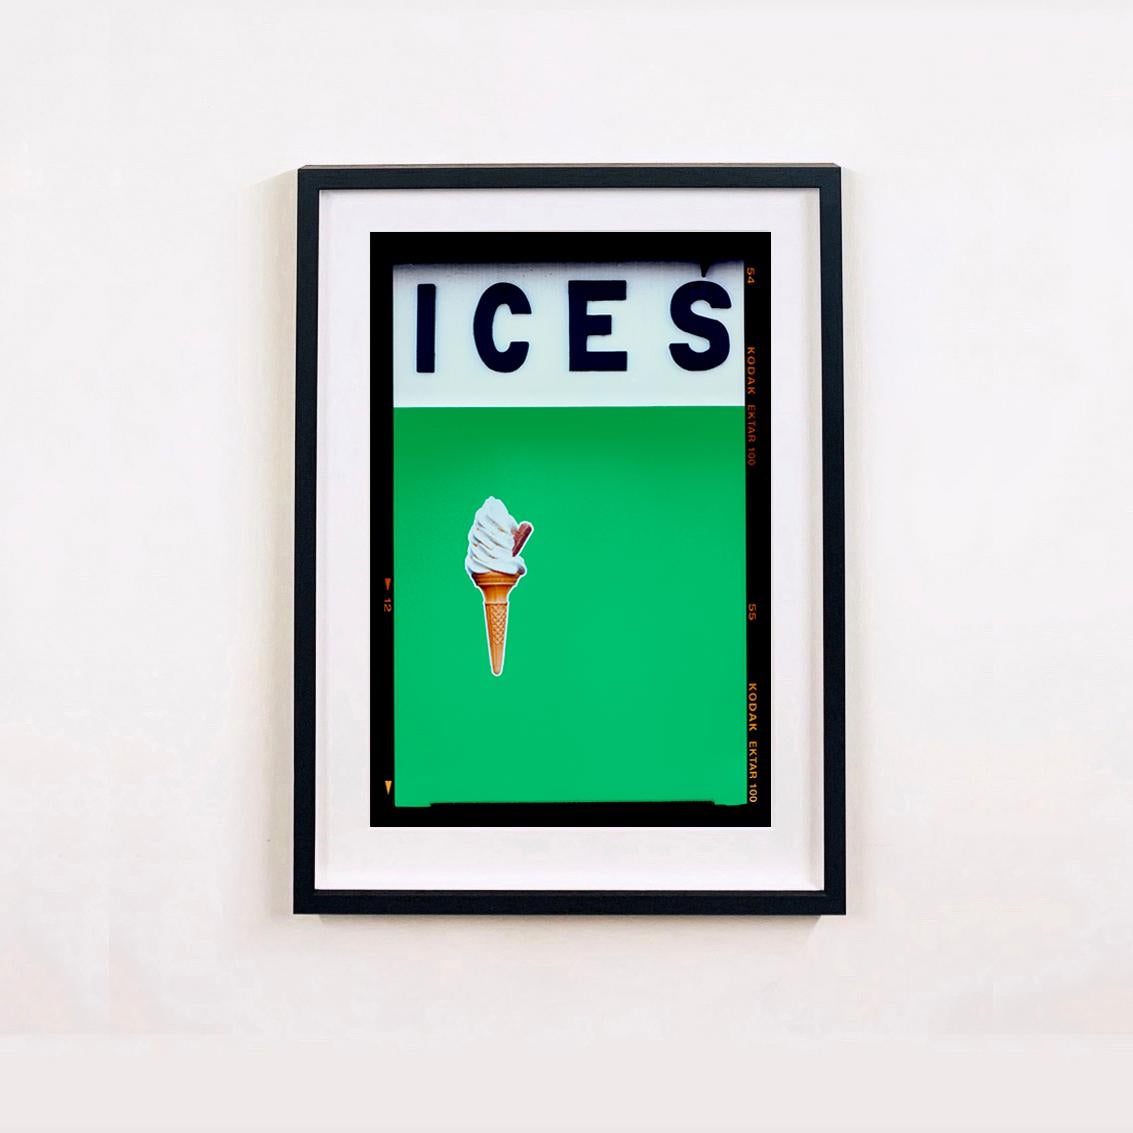 Ices (Green), Bexhill-on-Sea - British seaside color photography - Print by Richard Heeps